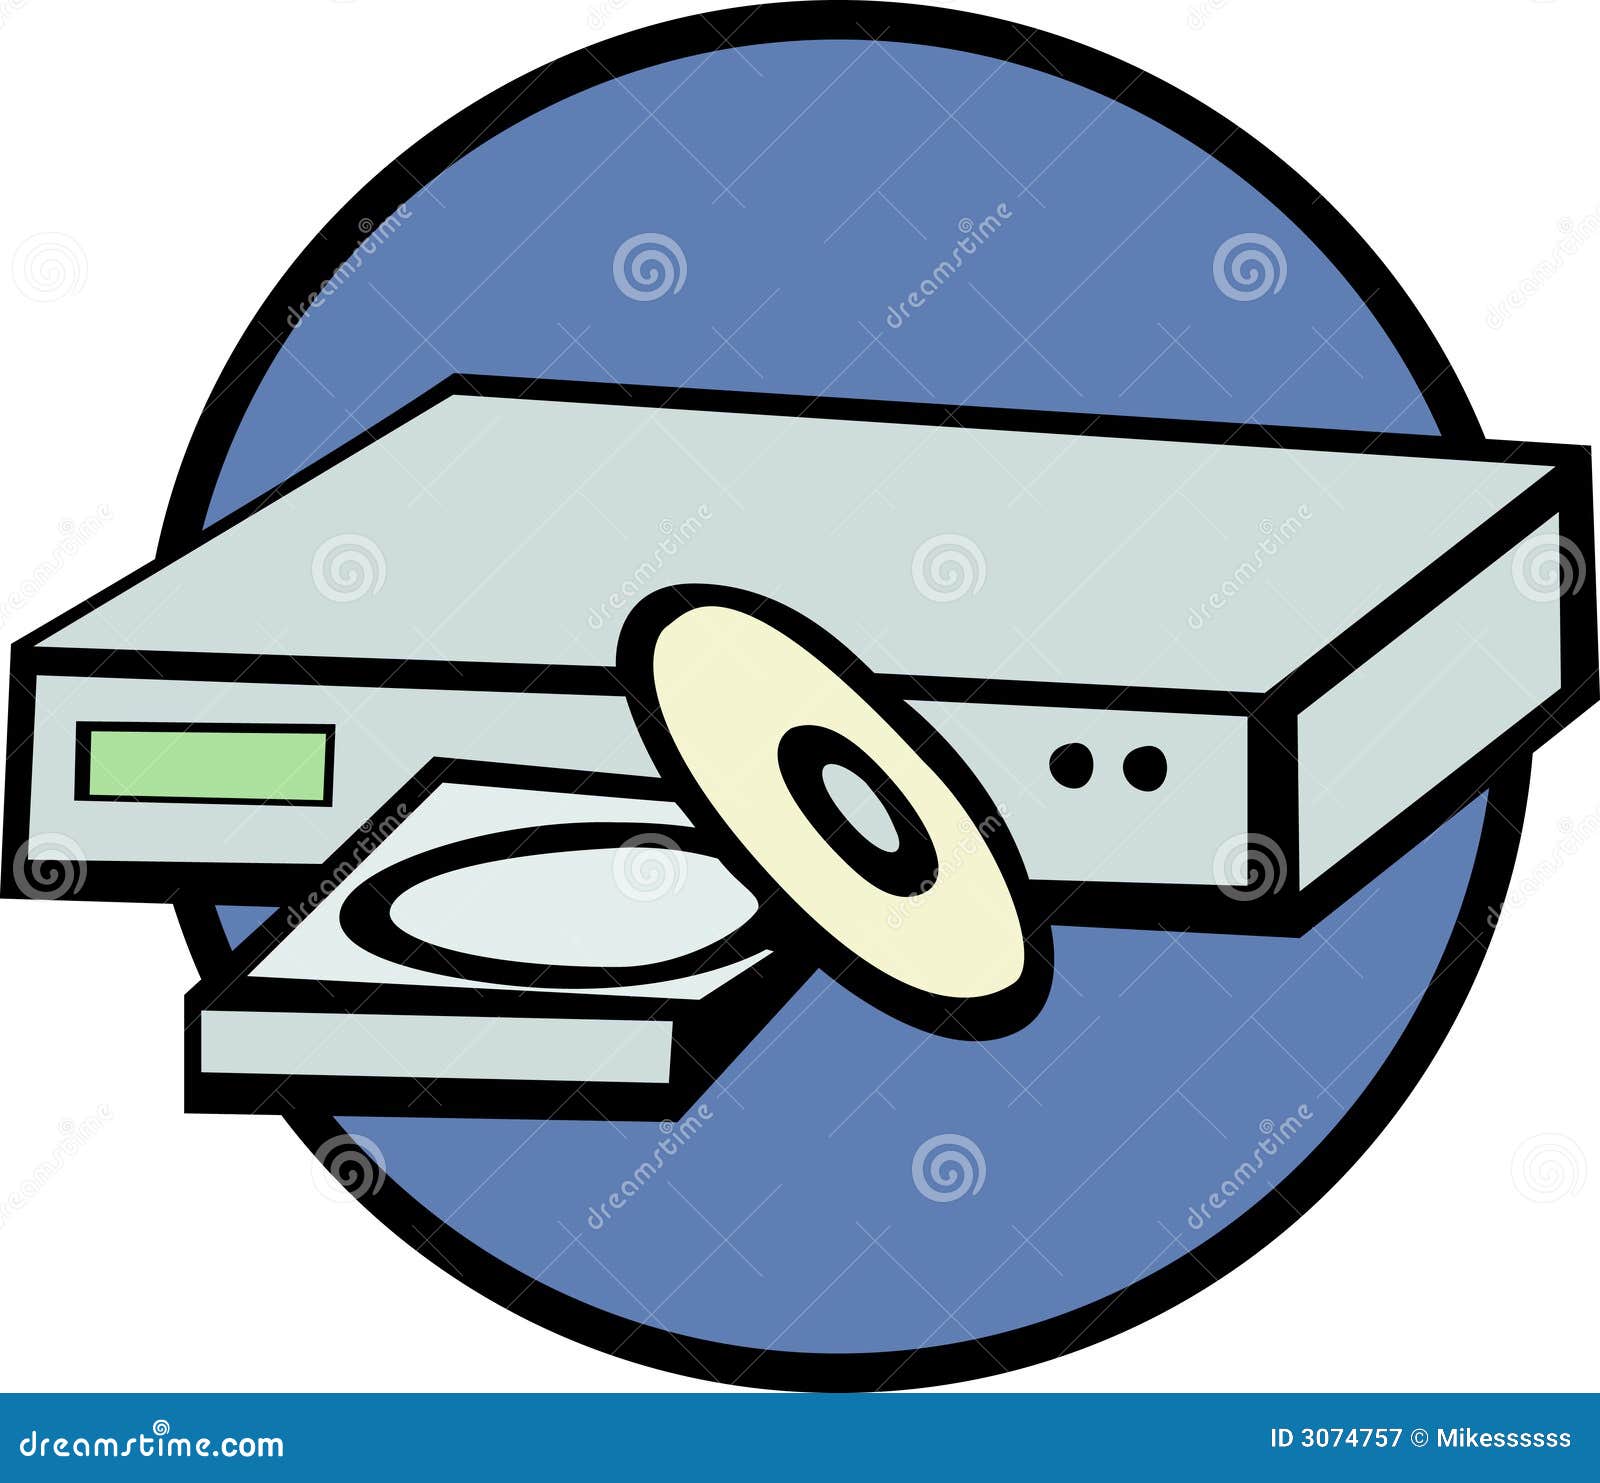 Dvd Player Vector Illustration Royalty Free Stock Photography - Image ...